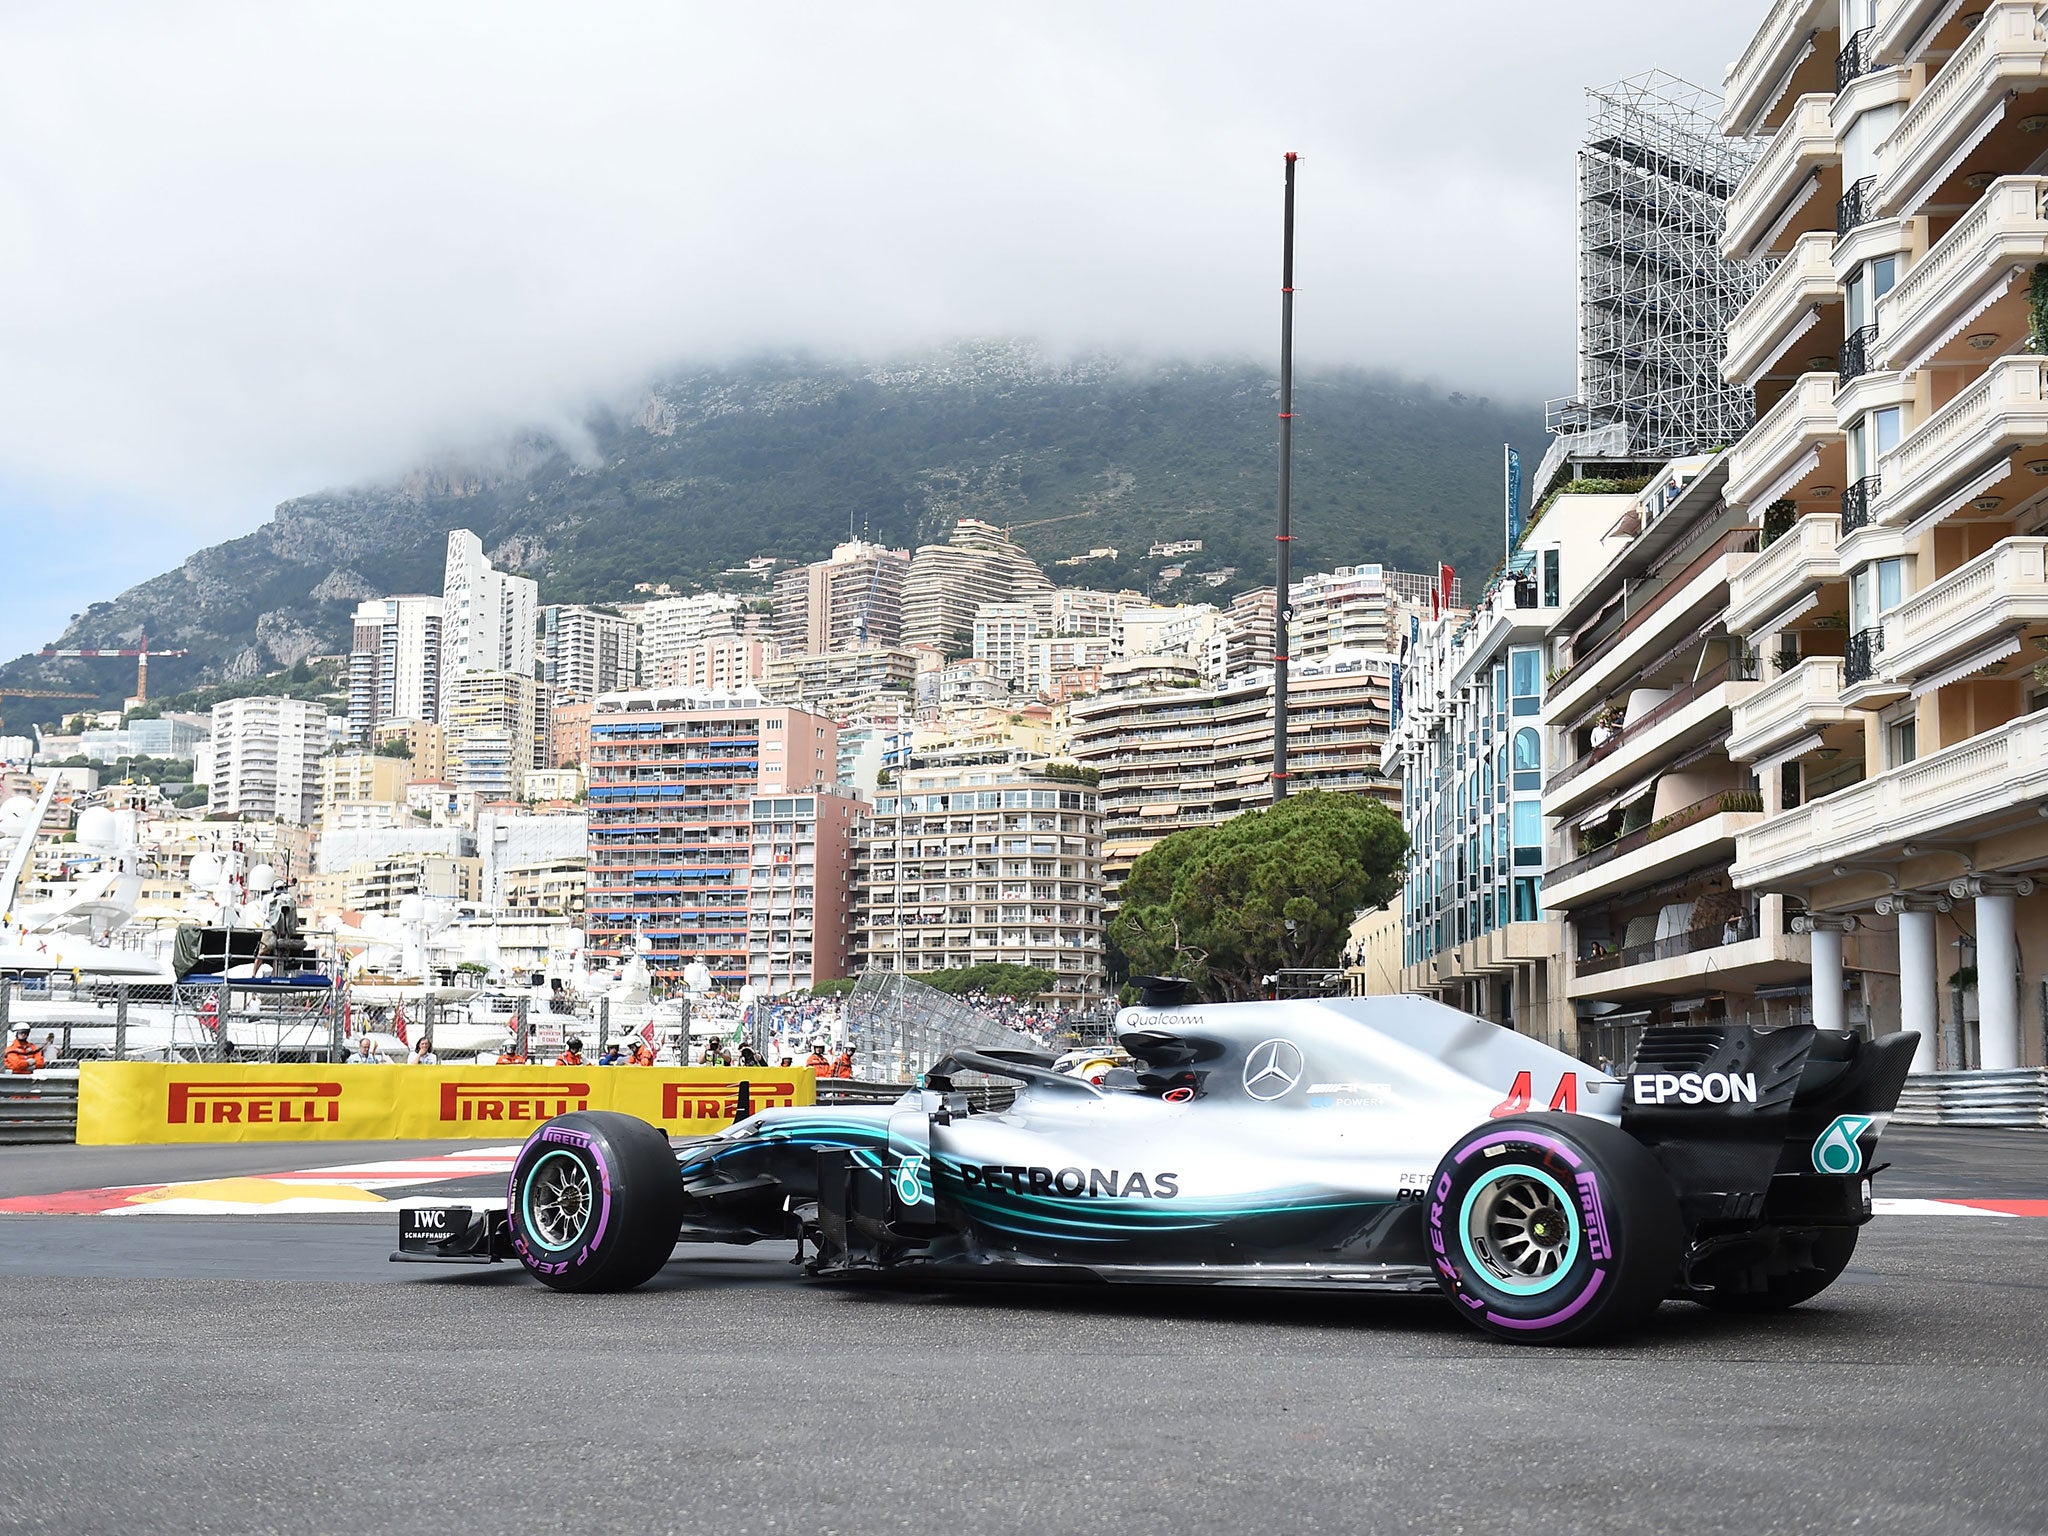 Despite struggling to keep up with Red Bull's racers, Lewis Hamilton believes he can secure a positive result in Monte Carlo